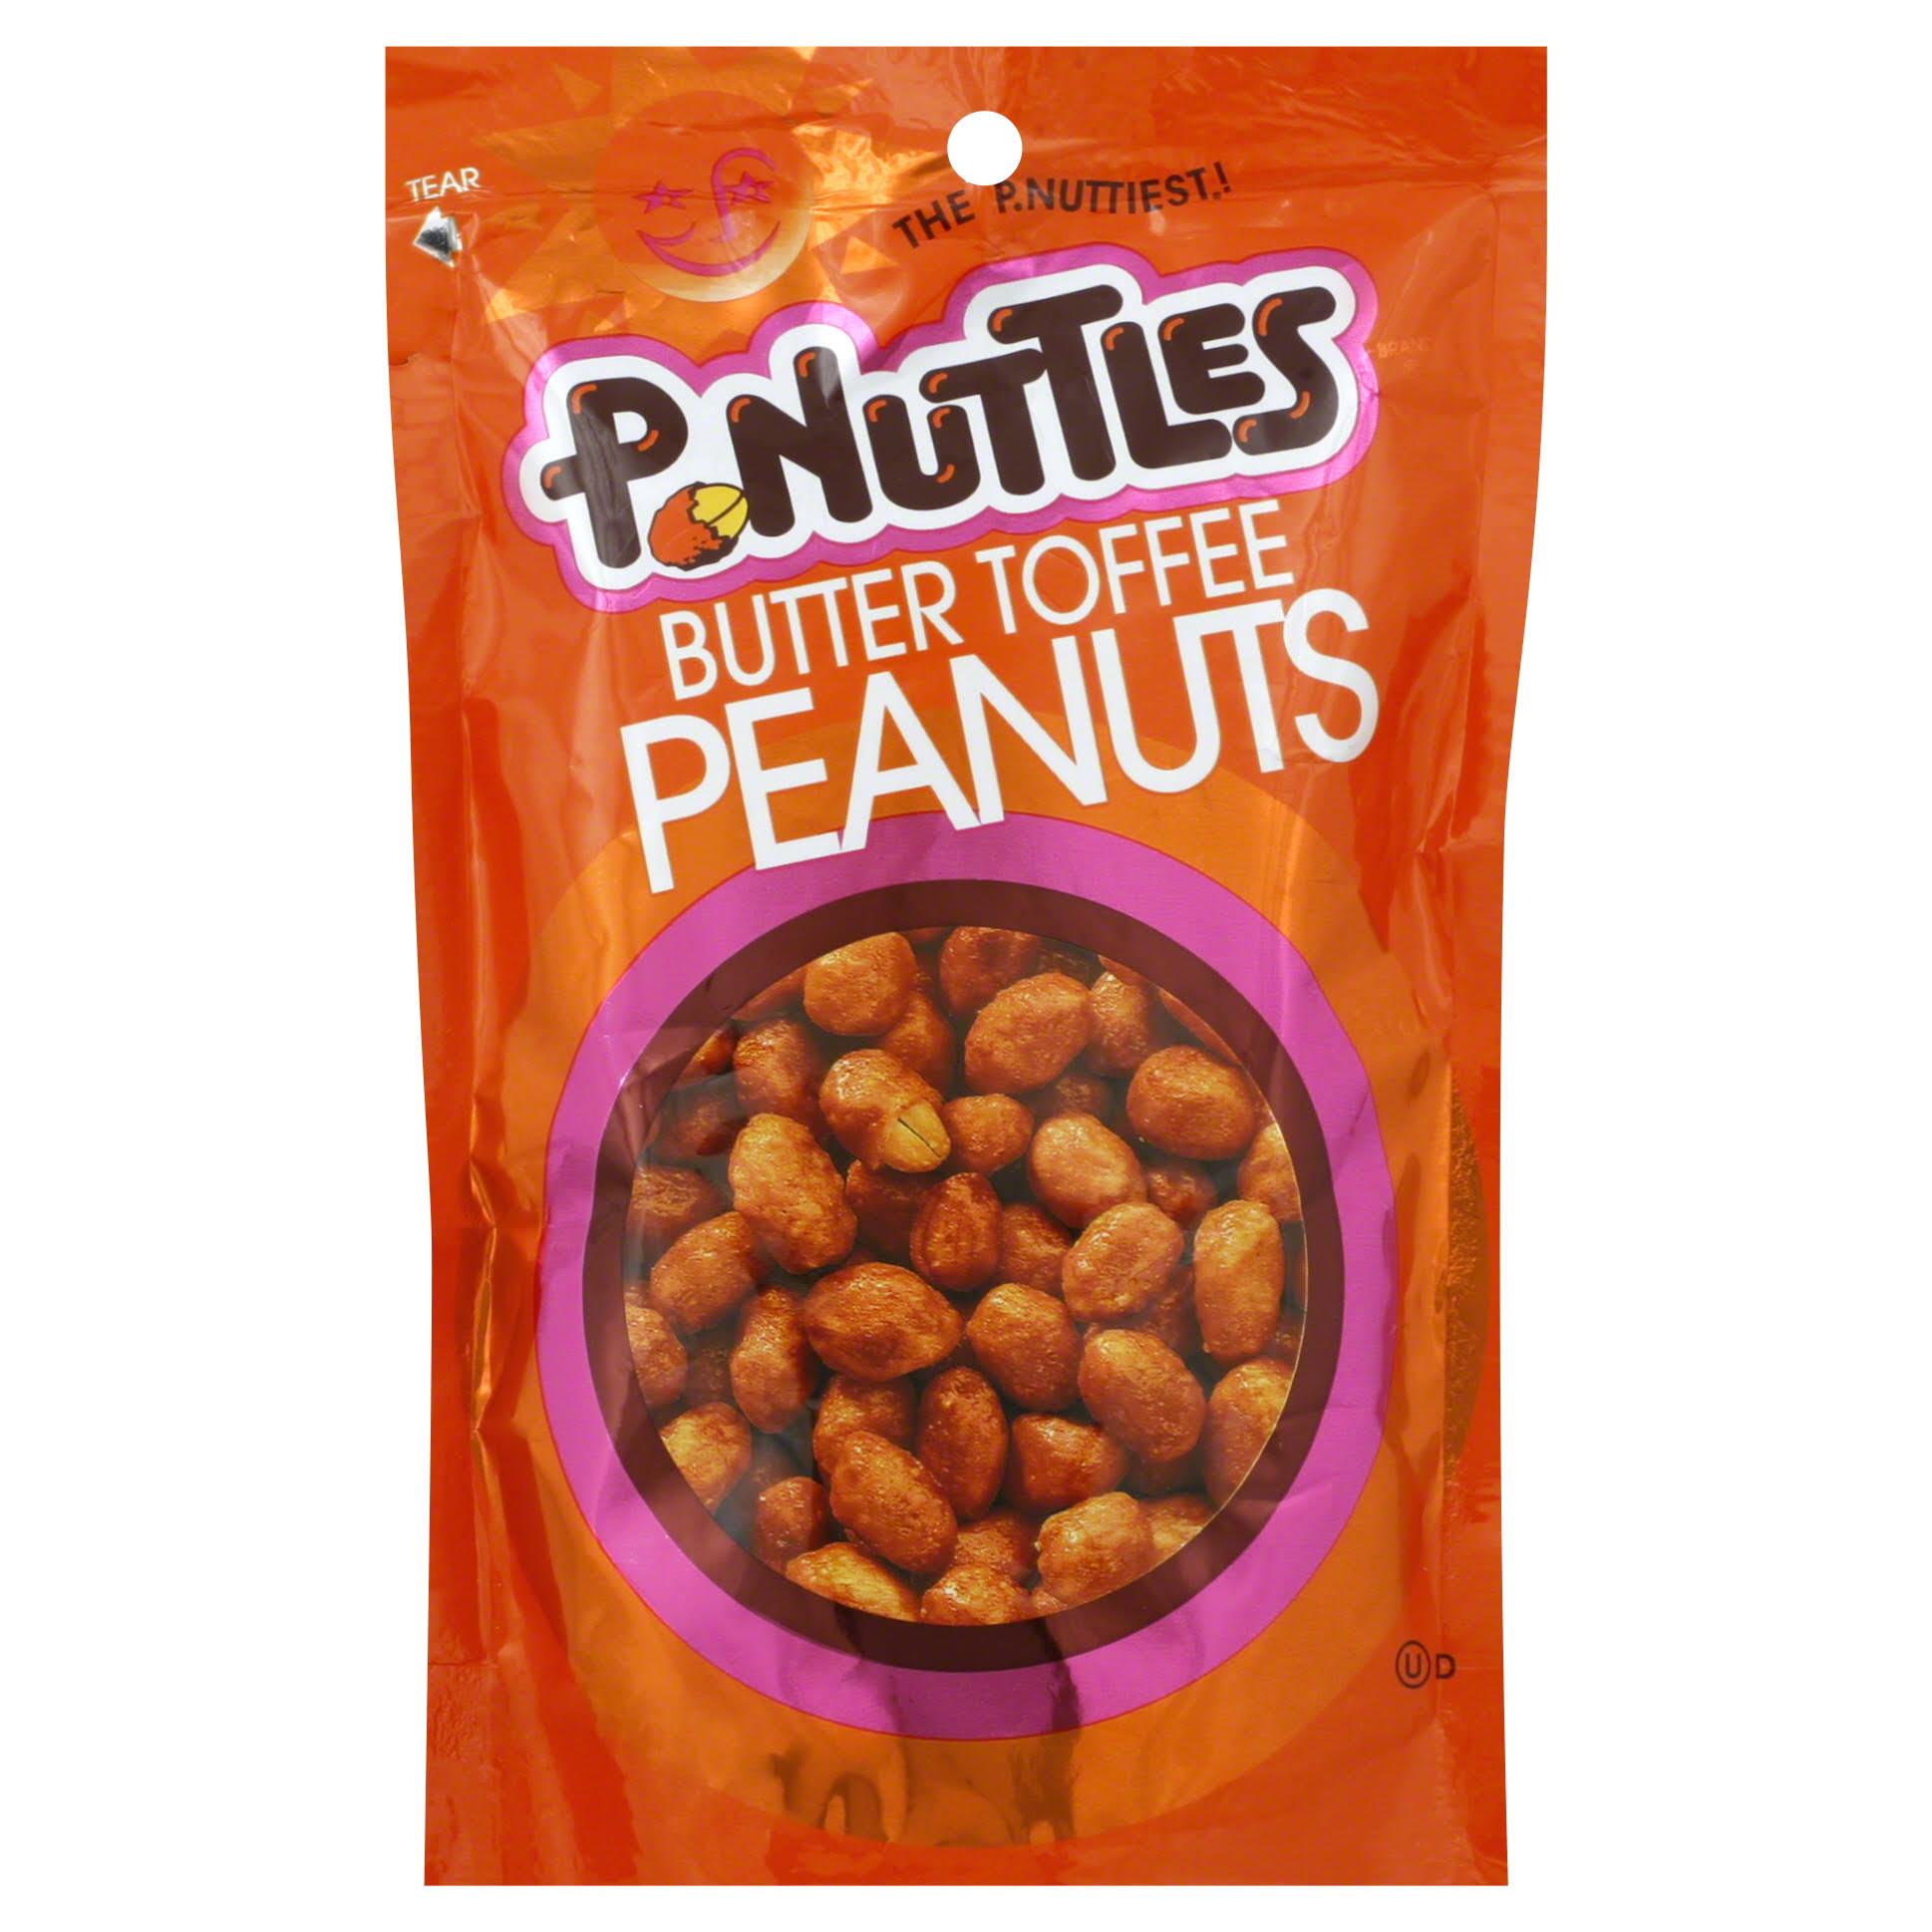 P Nuttles Peanuts - Butter Toffee, 5.25oz